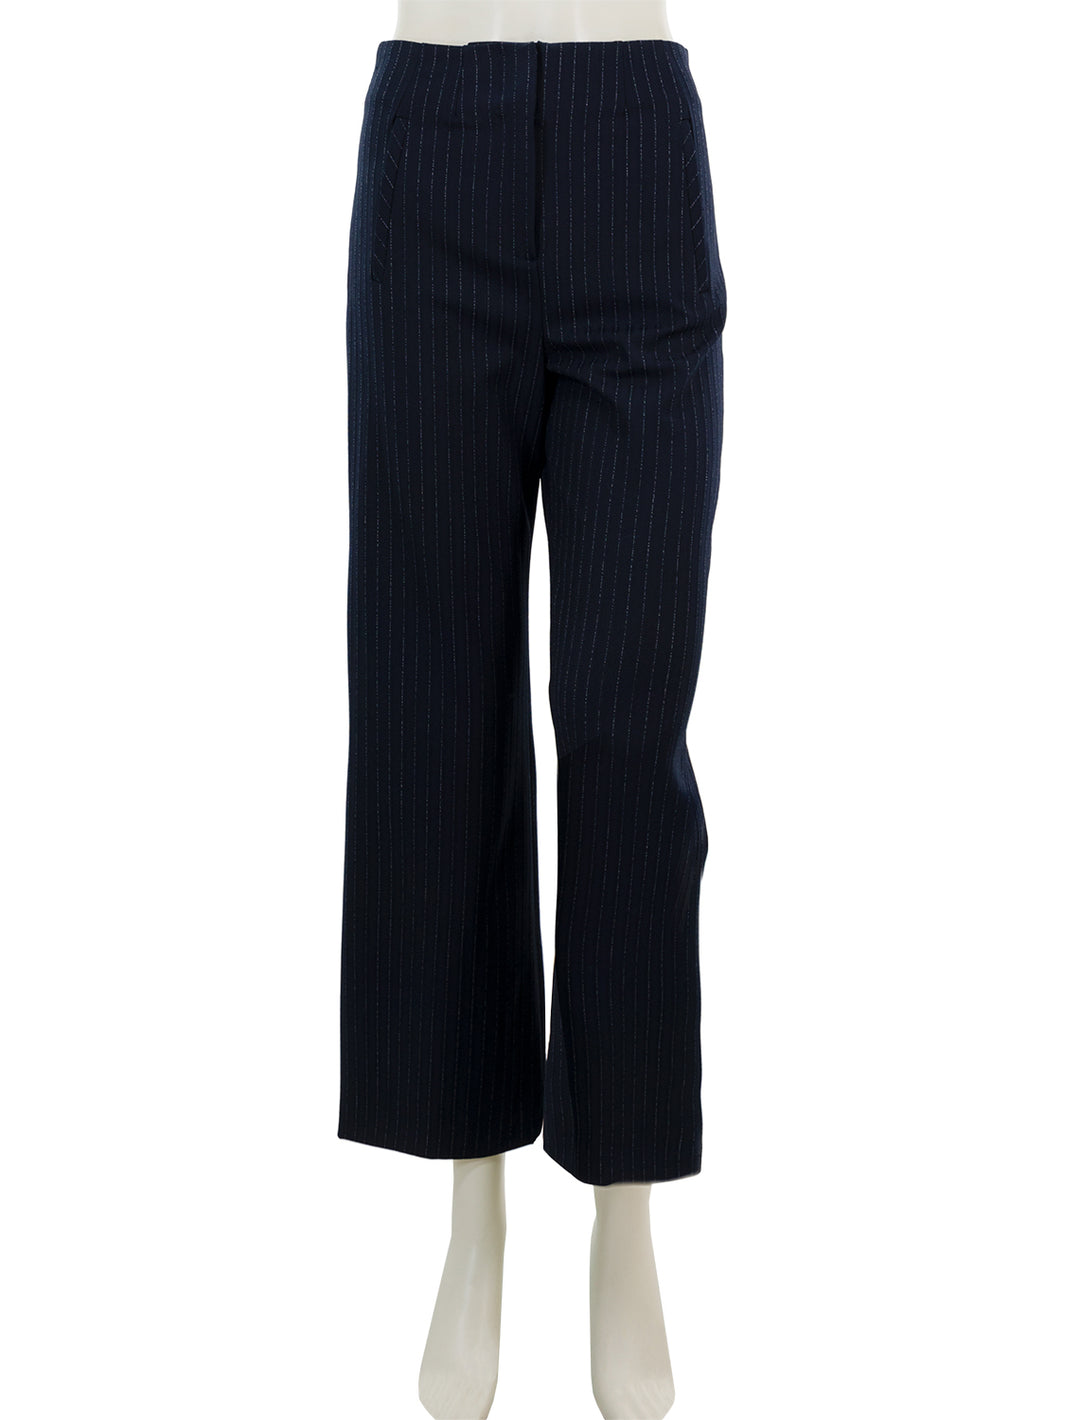 Front view of Veronica Beard's dova pant in navy pinstripe.